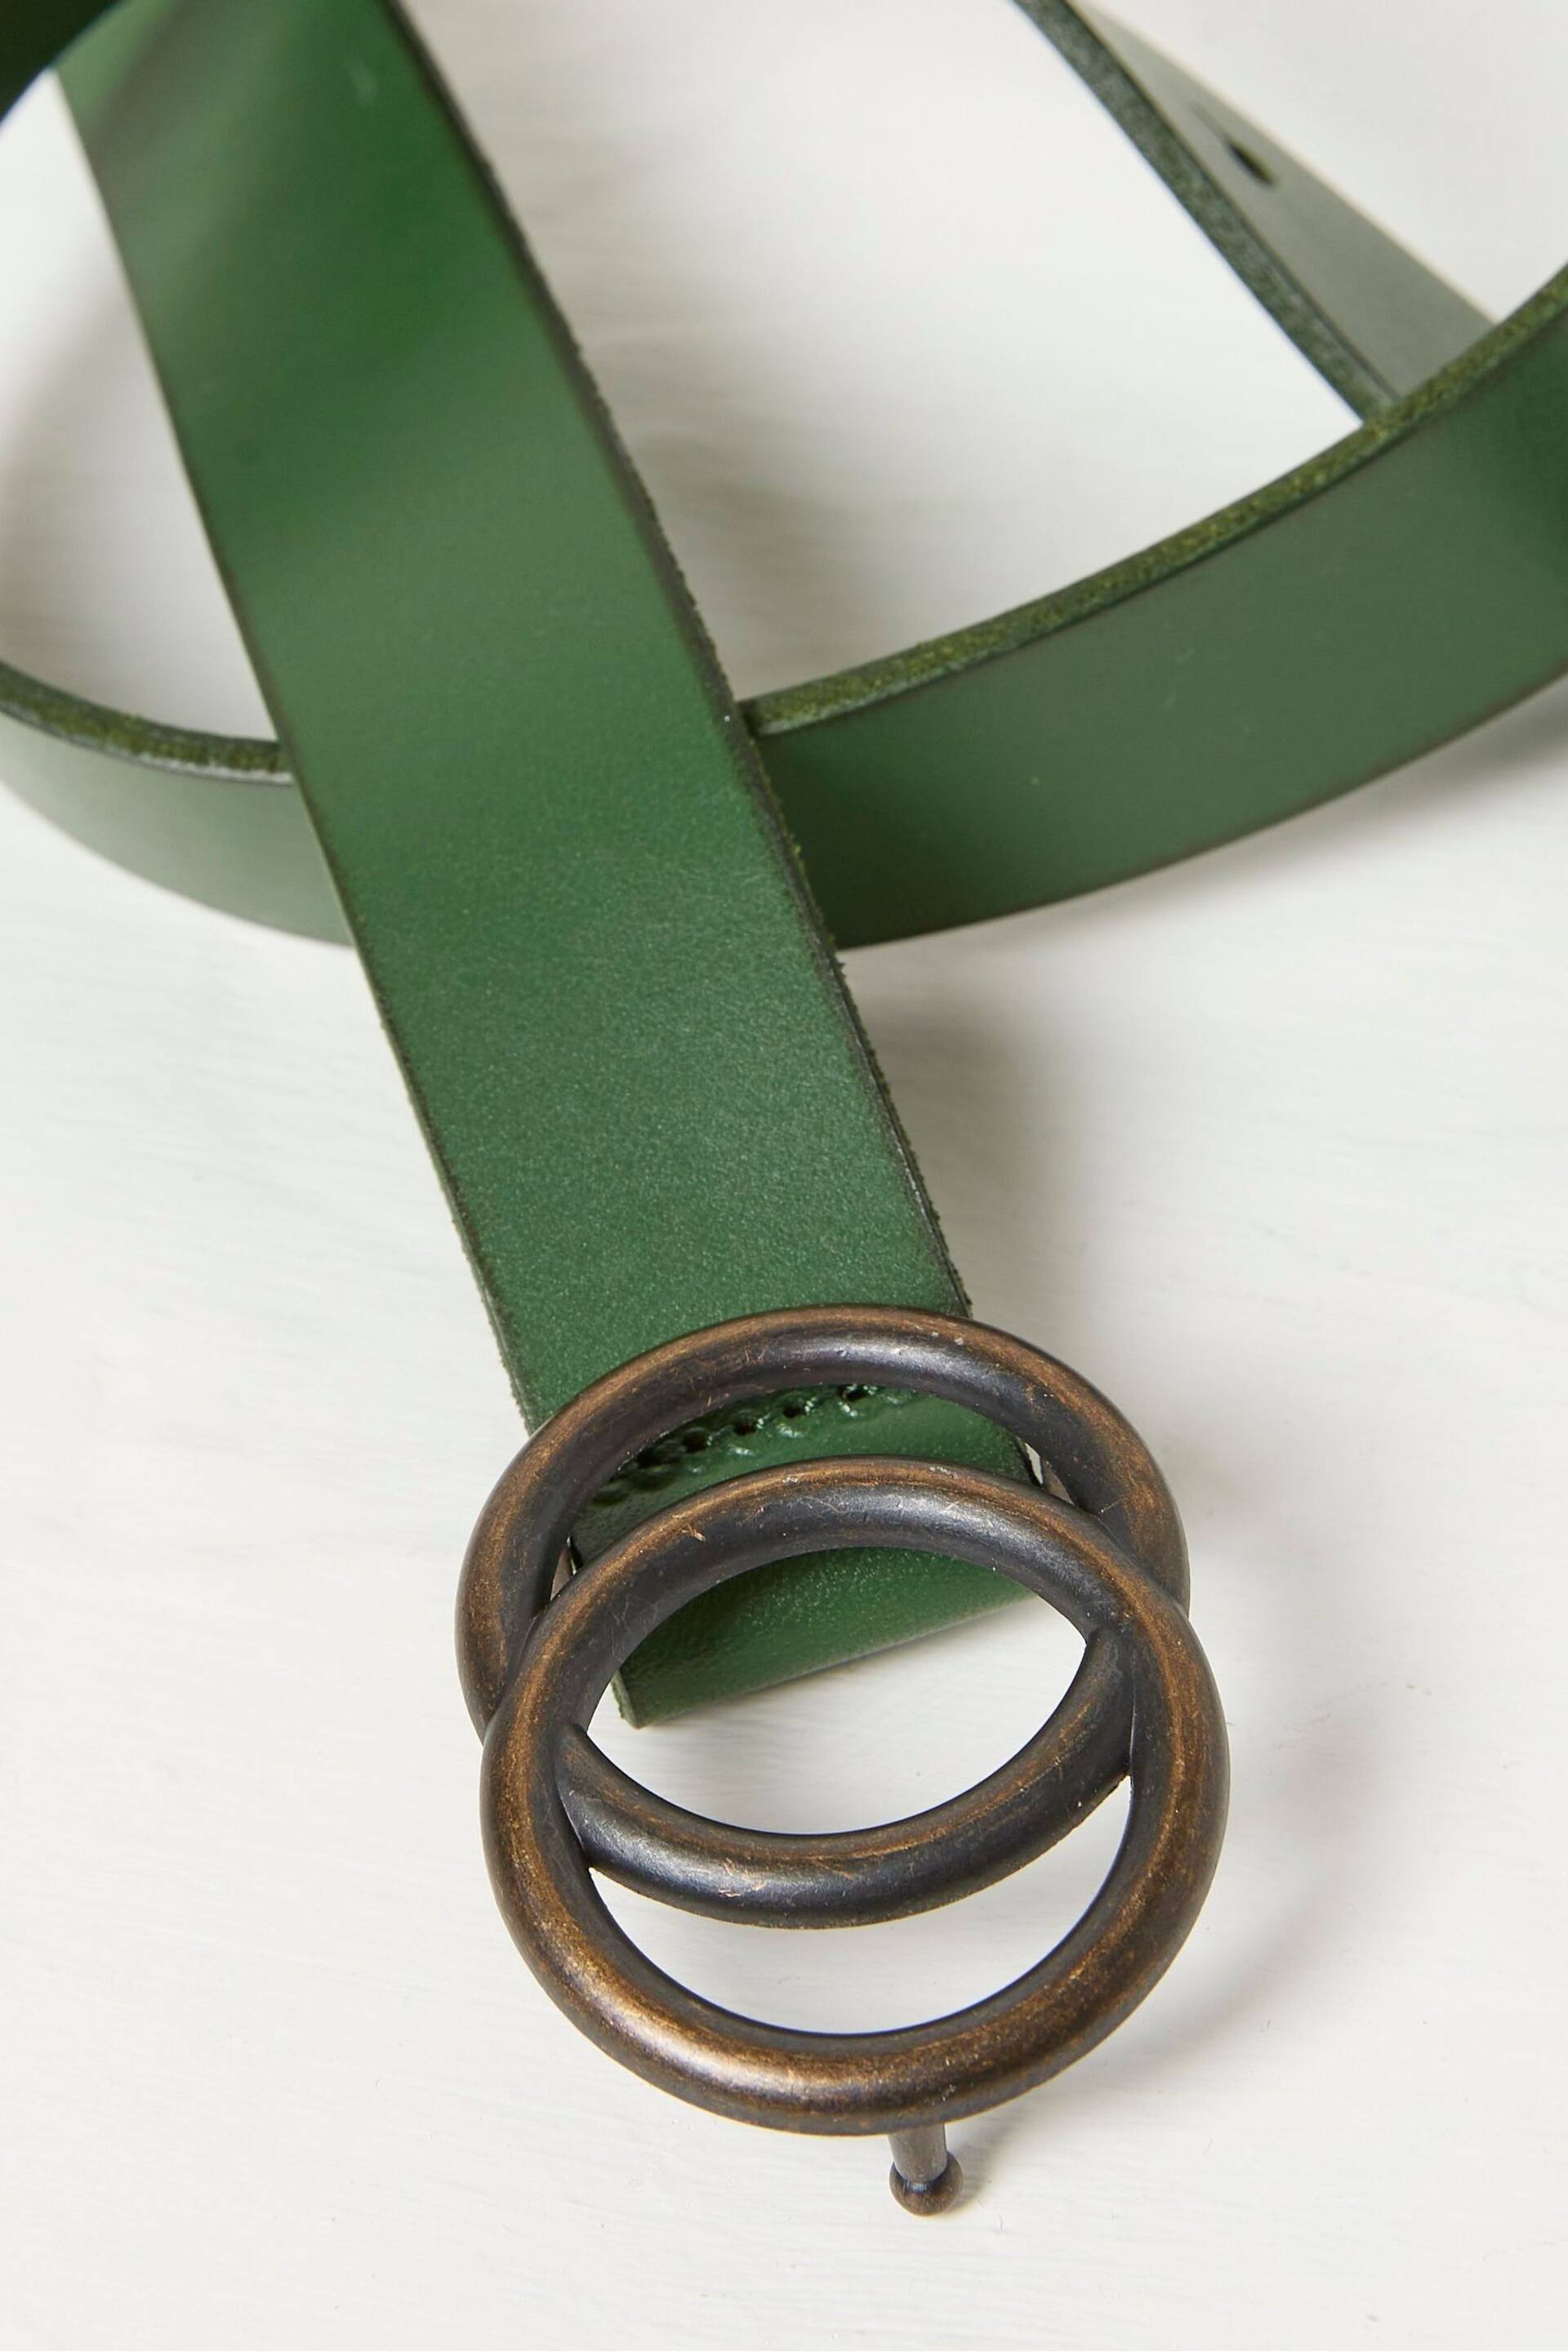 FatFace Green Jean Double Circle Belt - Image 2 of 2